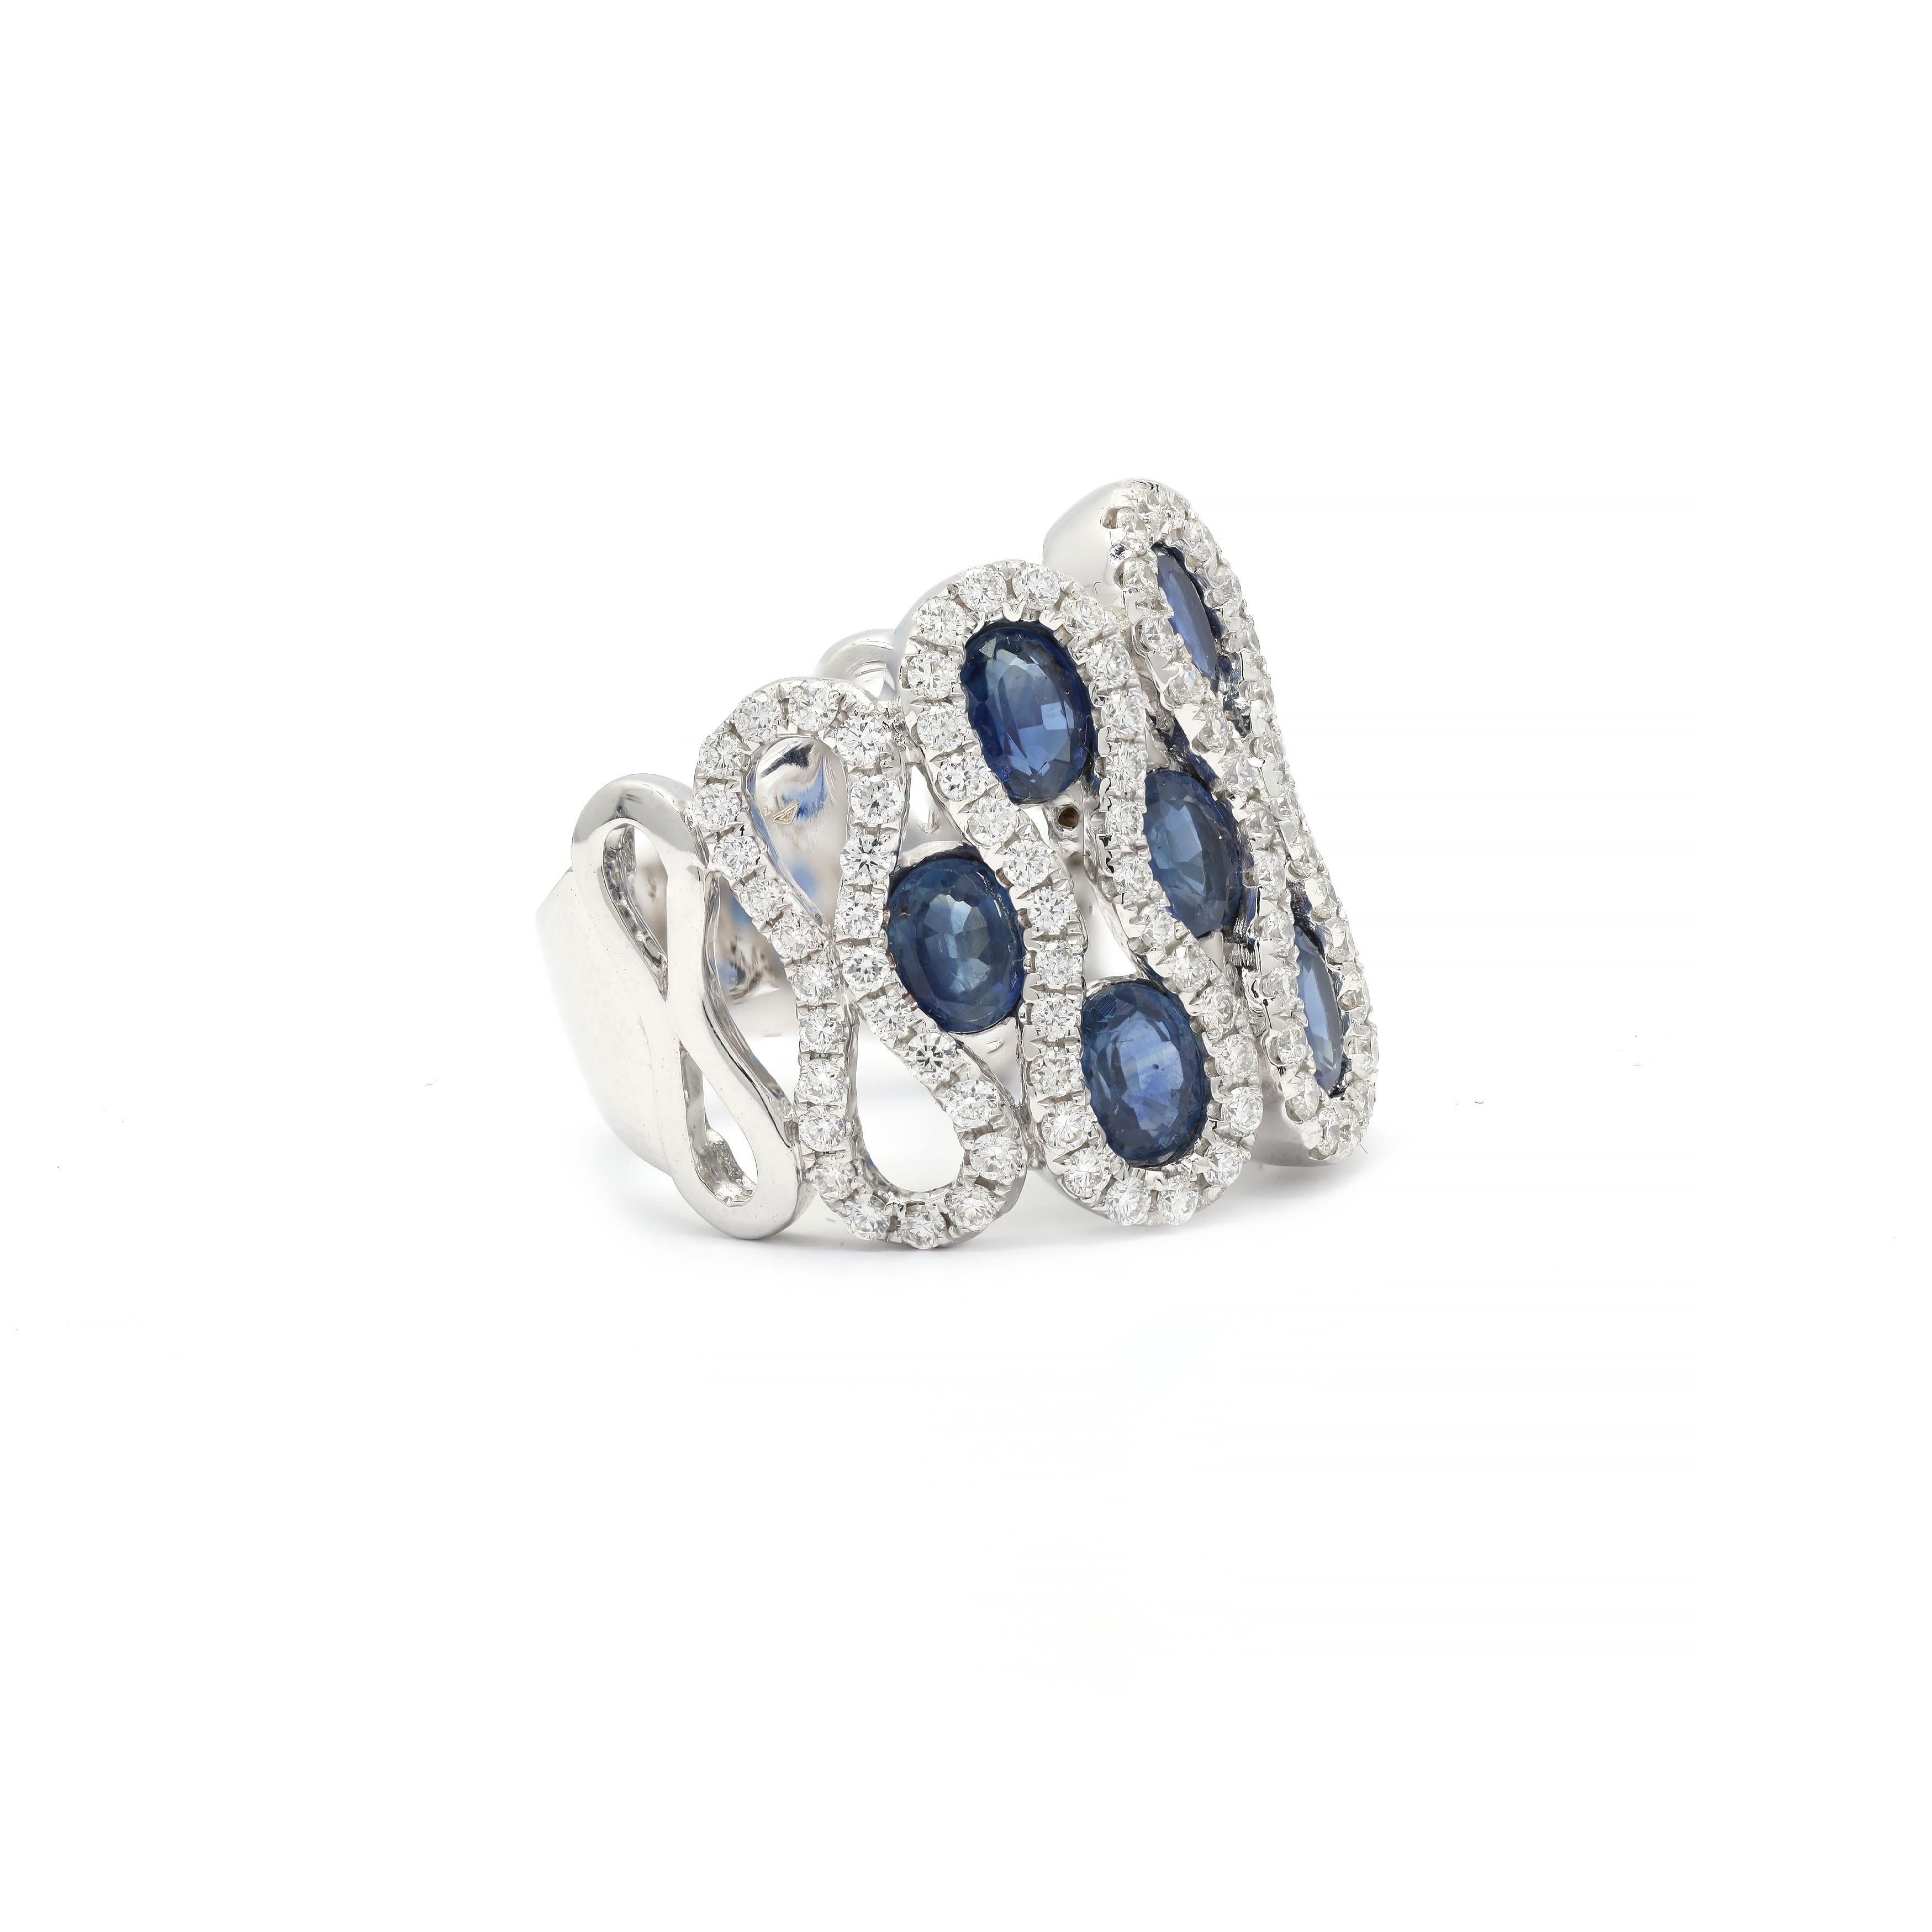 For Sale:  Blue Sapphire Cluster Diamond Ring in 14K White Gold  3